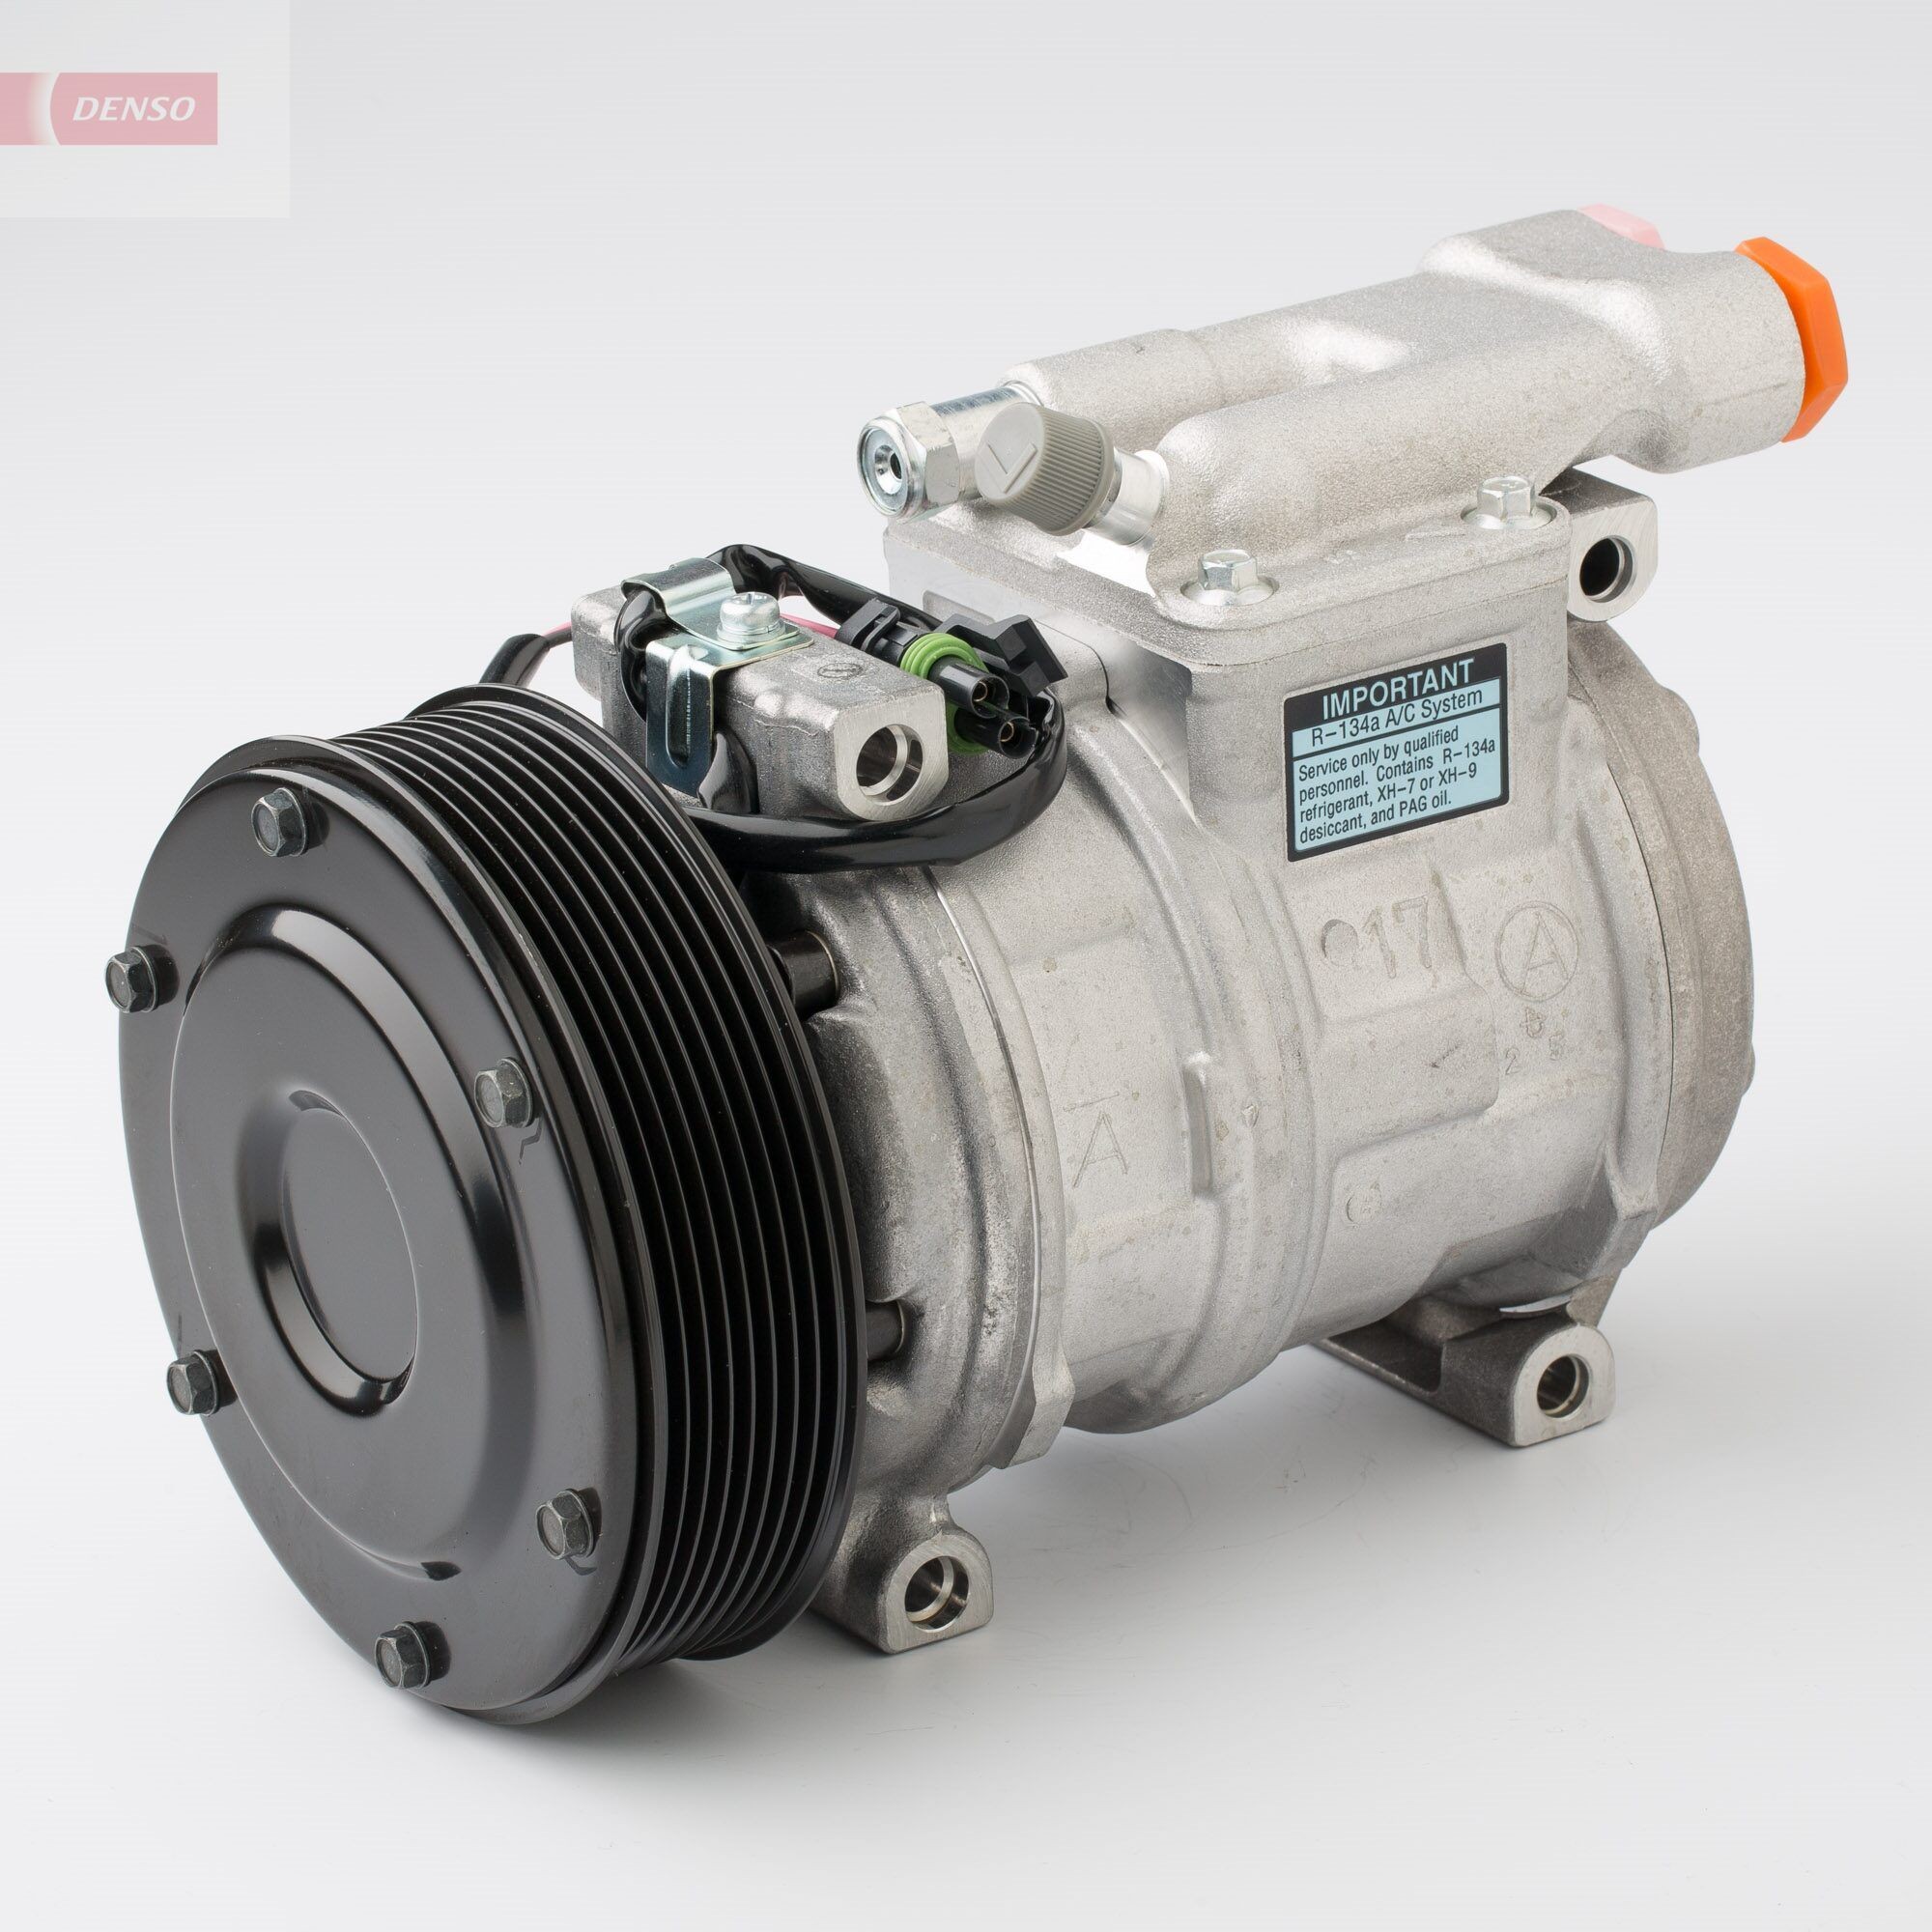 DENSO DCP99523 Air conditioning compressor 10PA17C, 24V, PAG 46, R 134a, with magnetic clutch